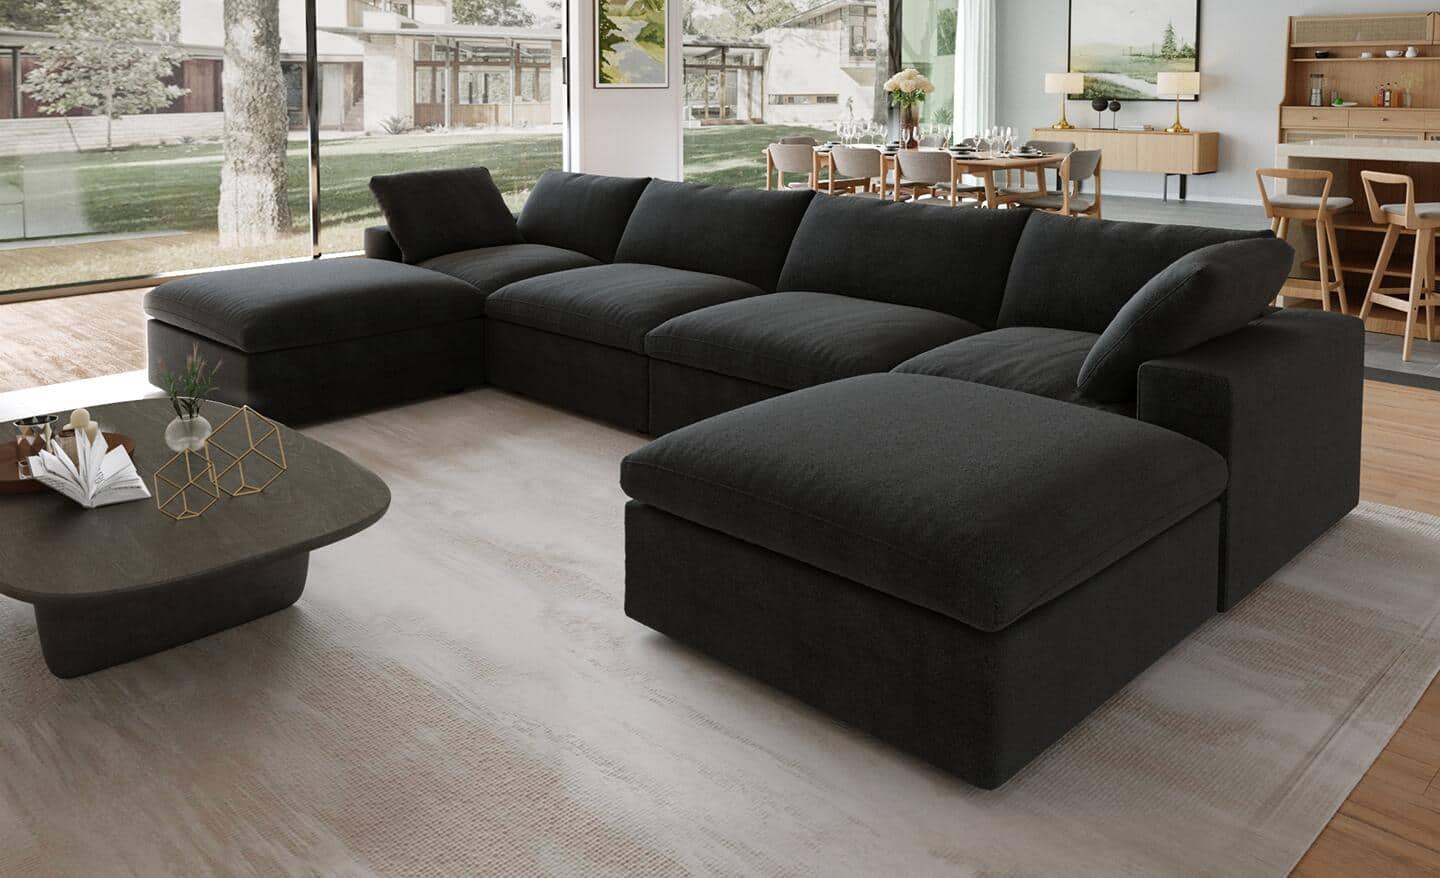 A comfortable sectional sofa featuring plenty of room for family and friends.